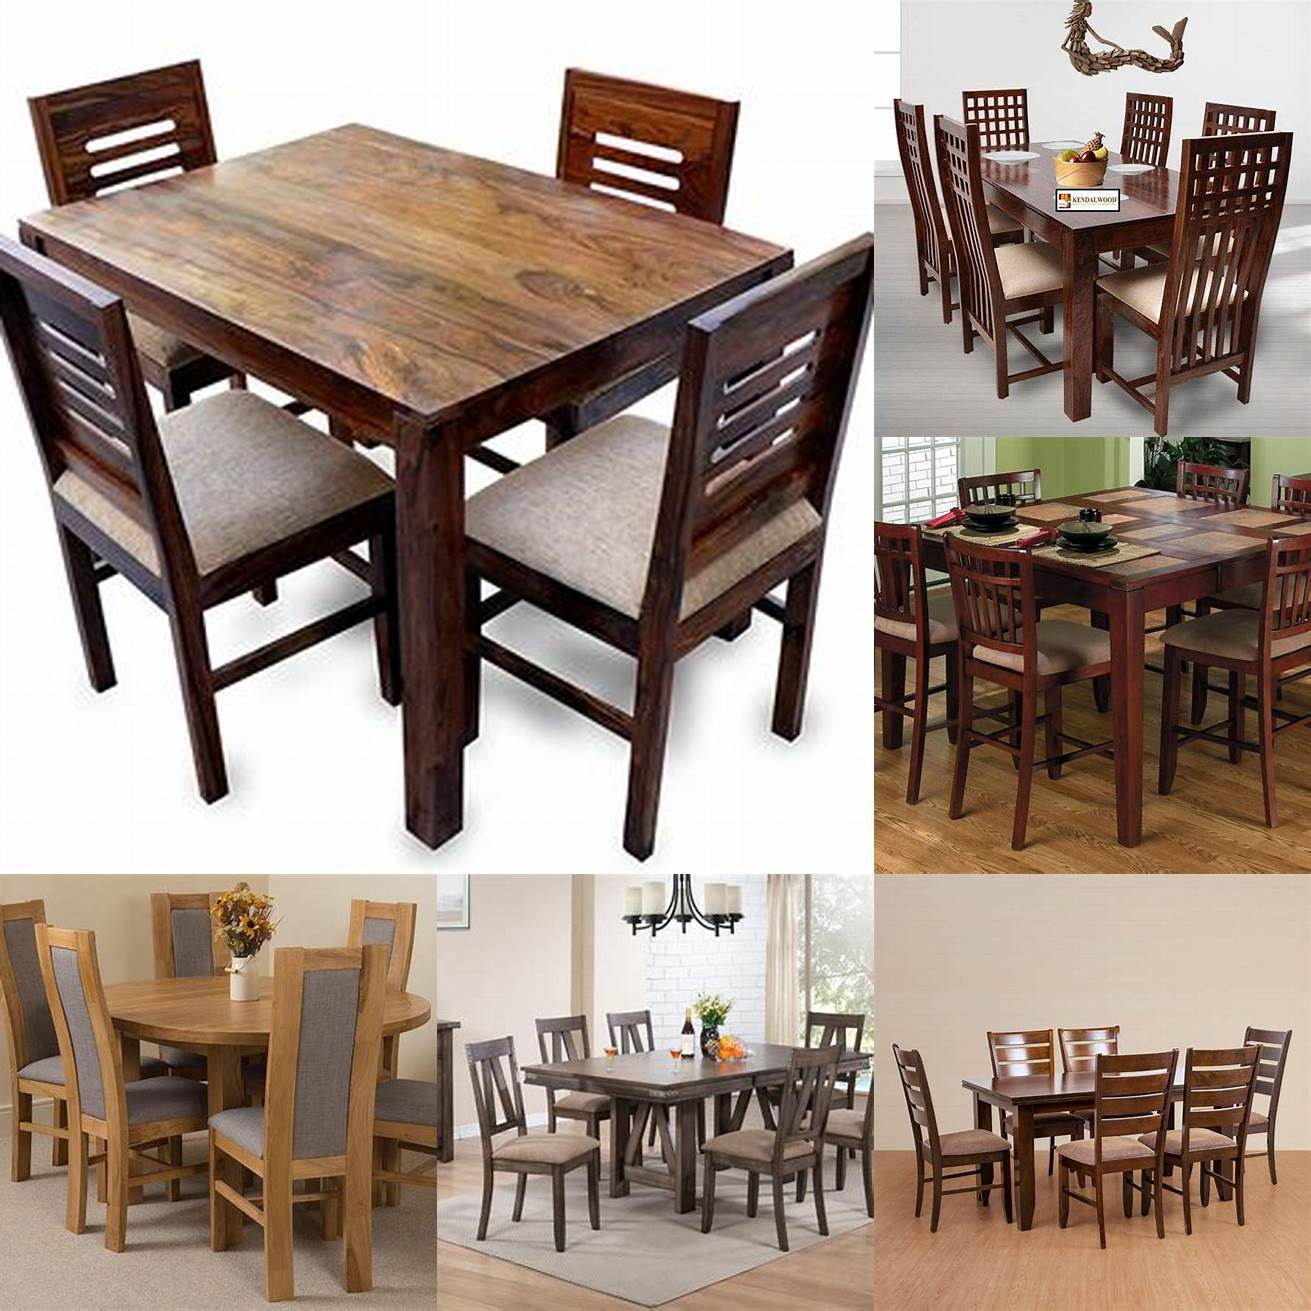 Large wooden table with comfortable chairs